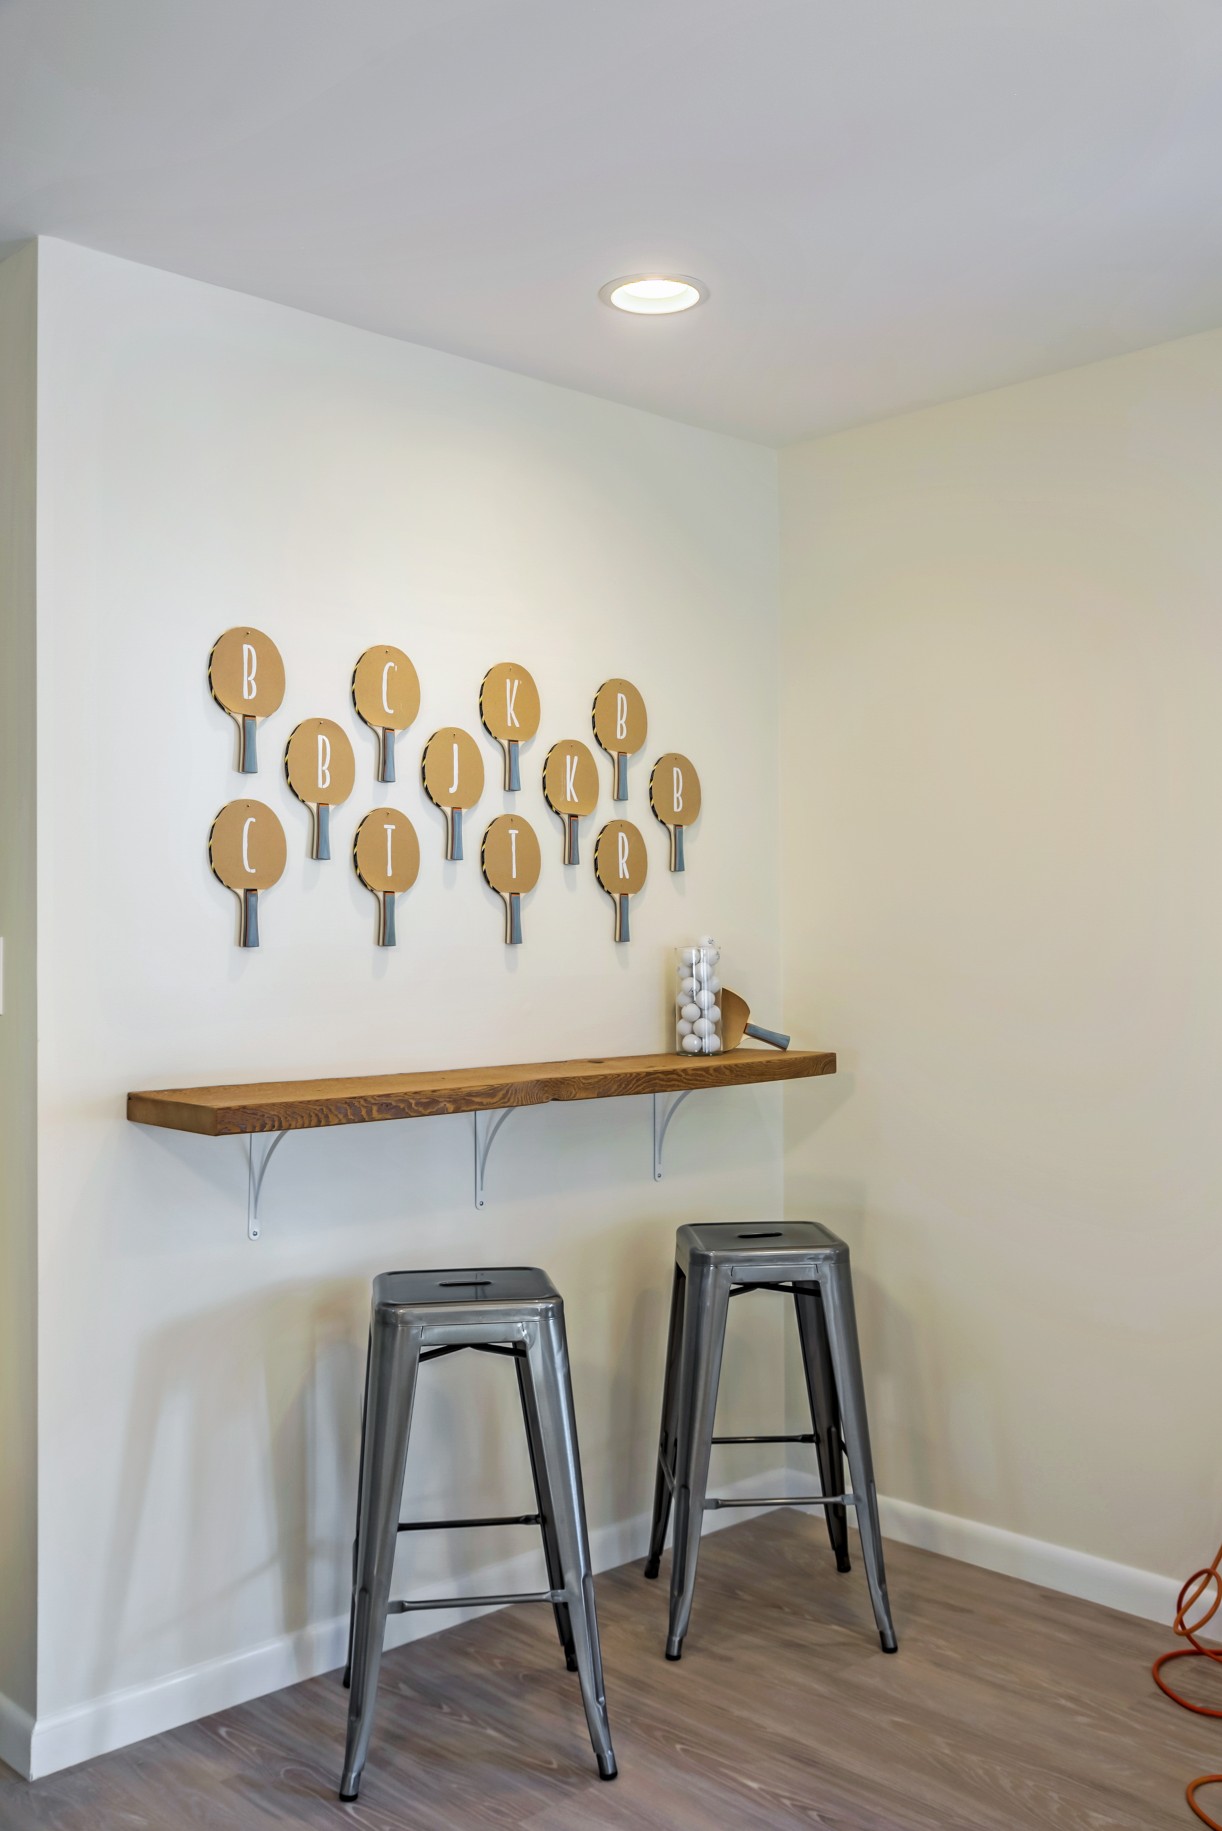 Table Tennis Wall with Personalized Ping Pong Paddles in Wellington Parkway, Bethany Beach DE Renovation